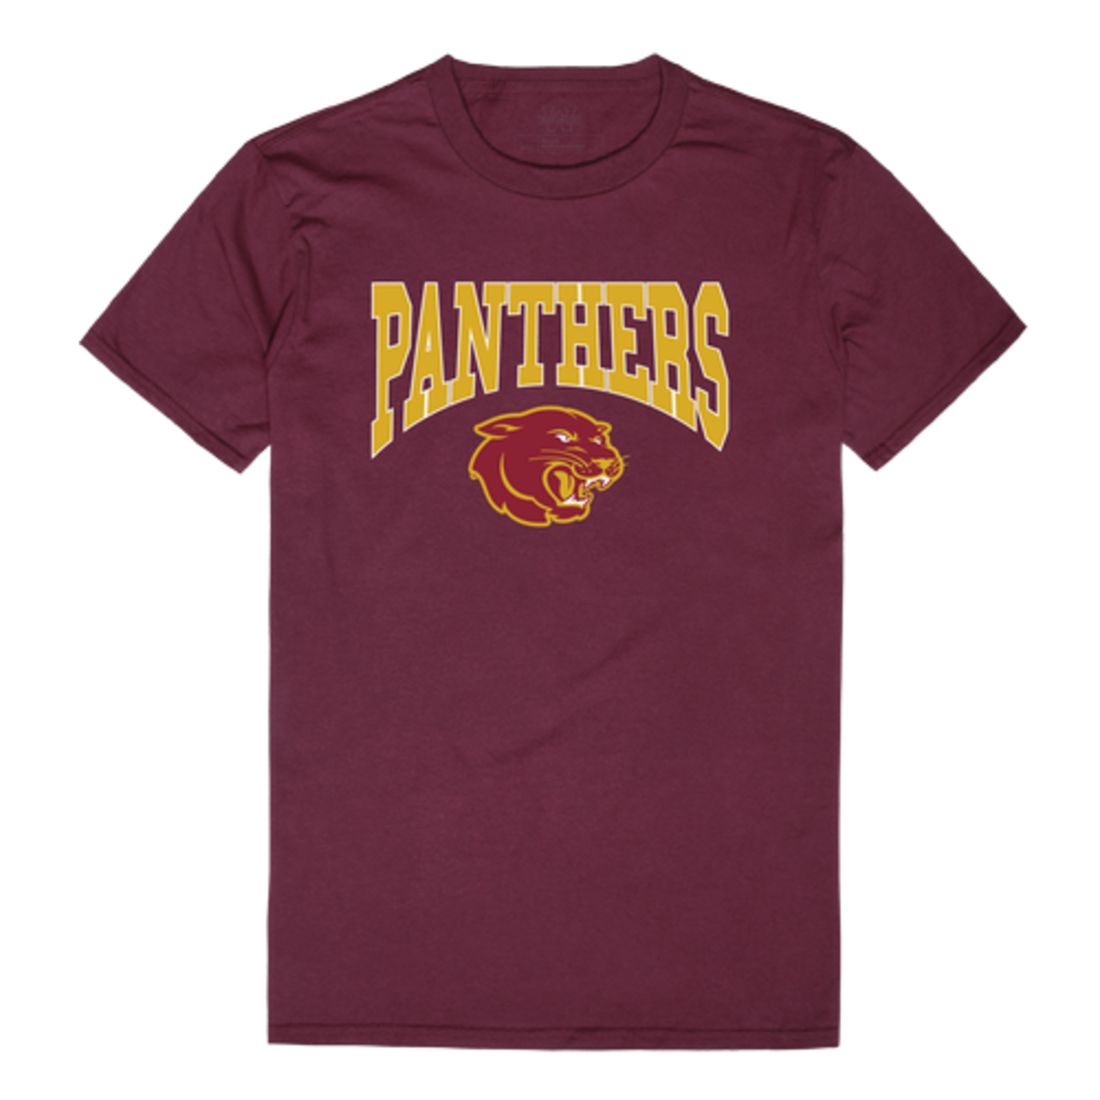 Sacramento City College Panthers Athletic T-Shirt Tee